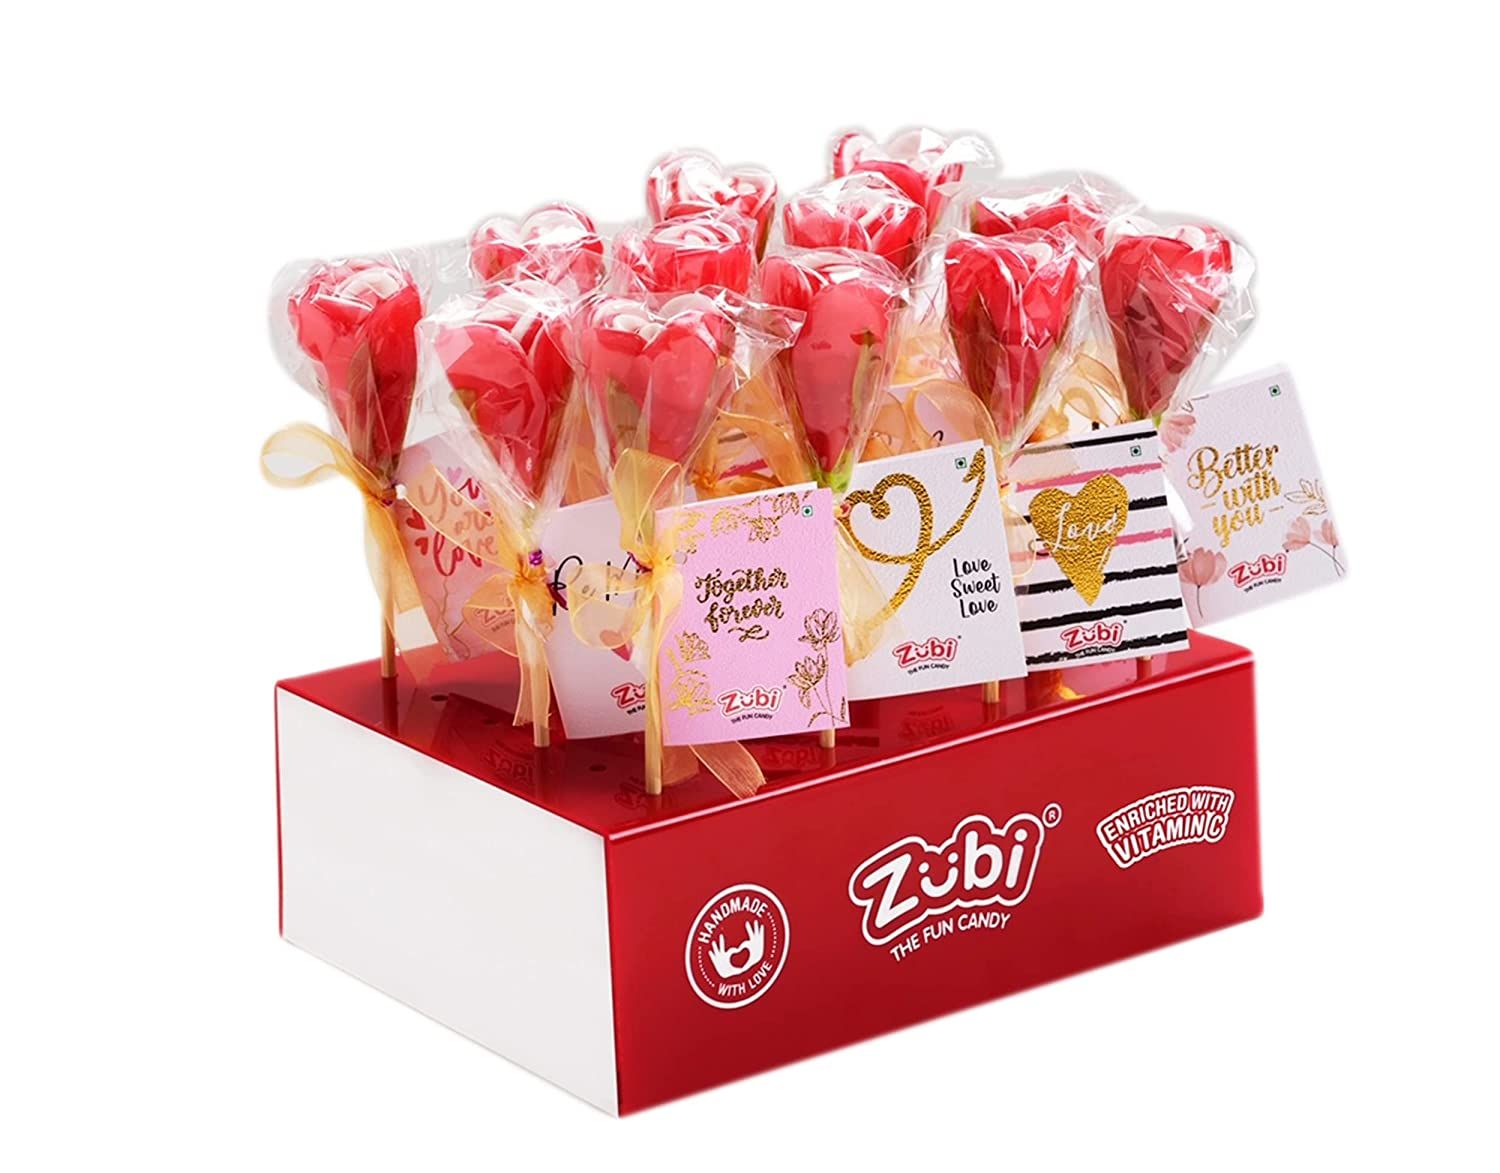 ZUBI THE FUN CANDY Red Rose Lollipops Image